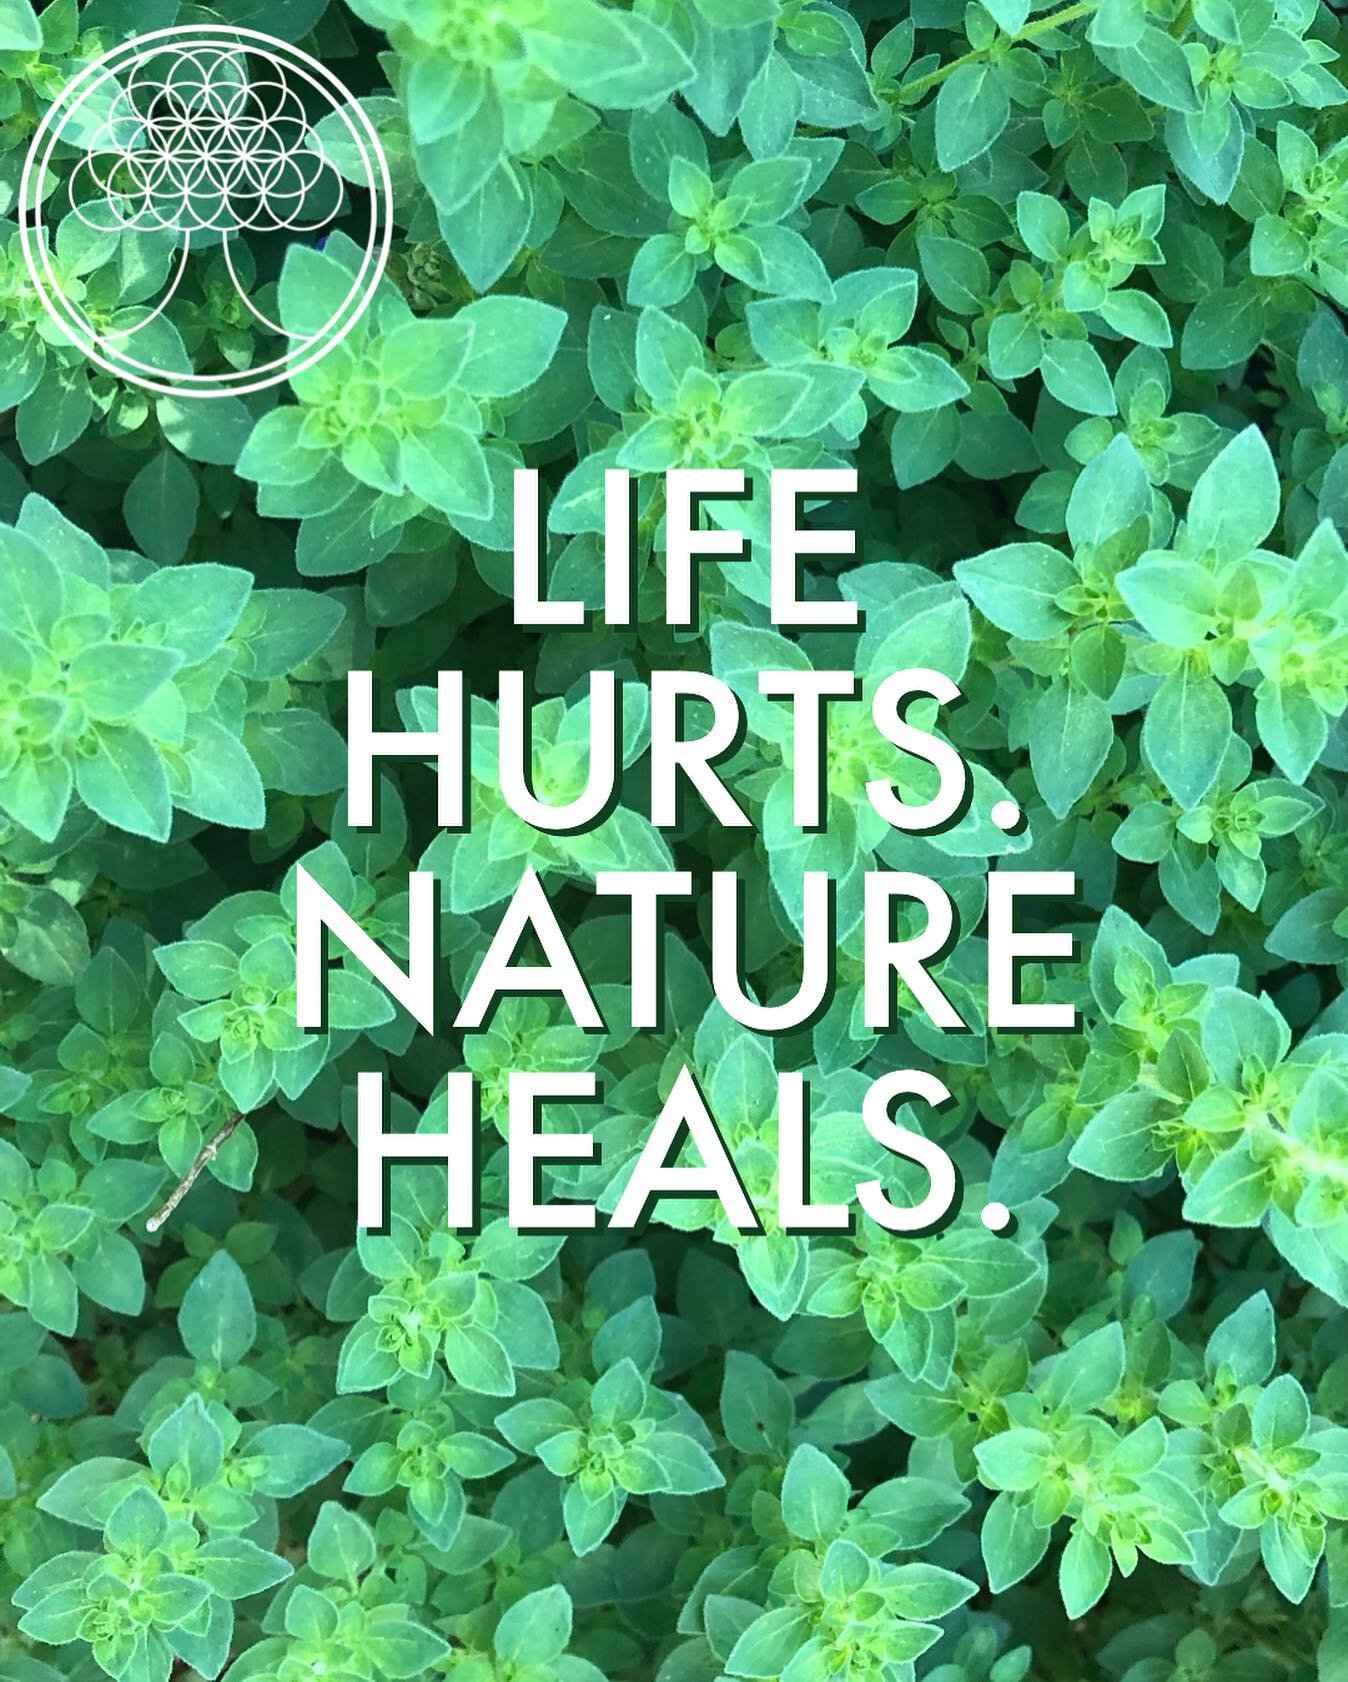 For anyone new here or just a friendly reminder for those stopping by. Nature Heals is a 501 (c)(3) service organization that provides nature-based therapies in order to improve the mental and emotional well-being of children and/or adults who would 